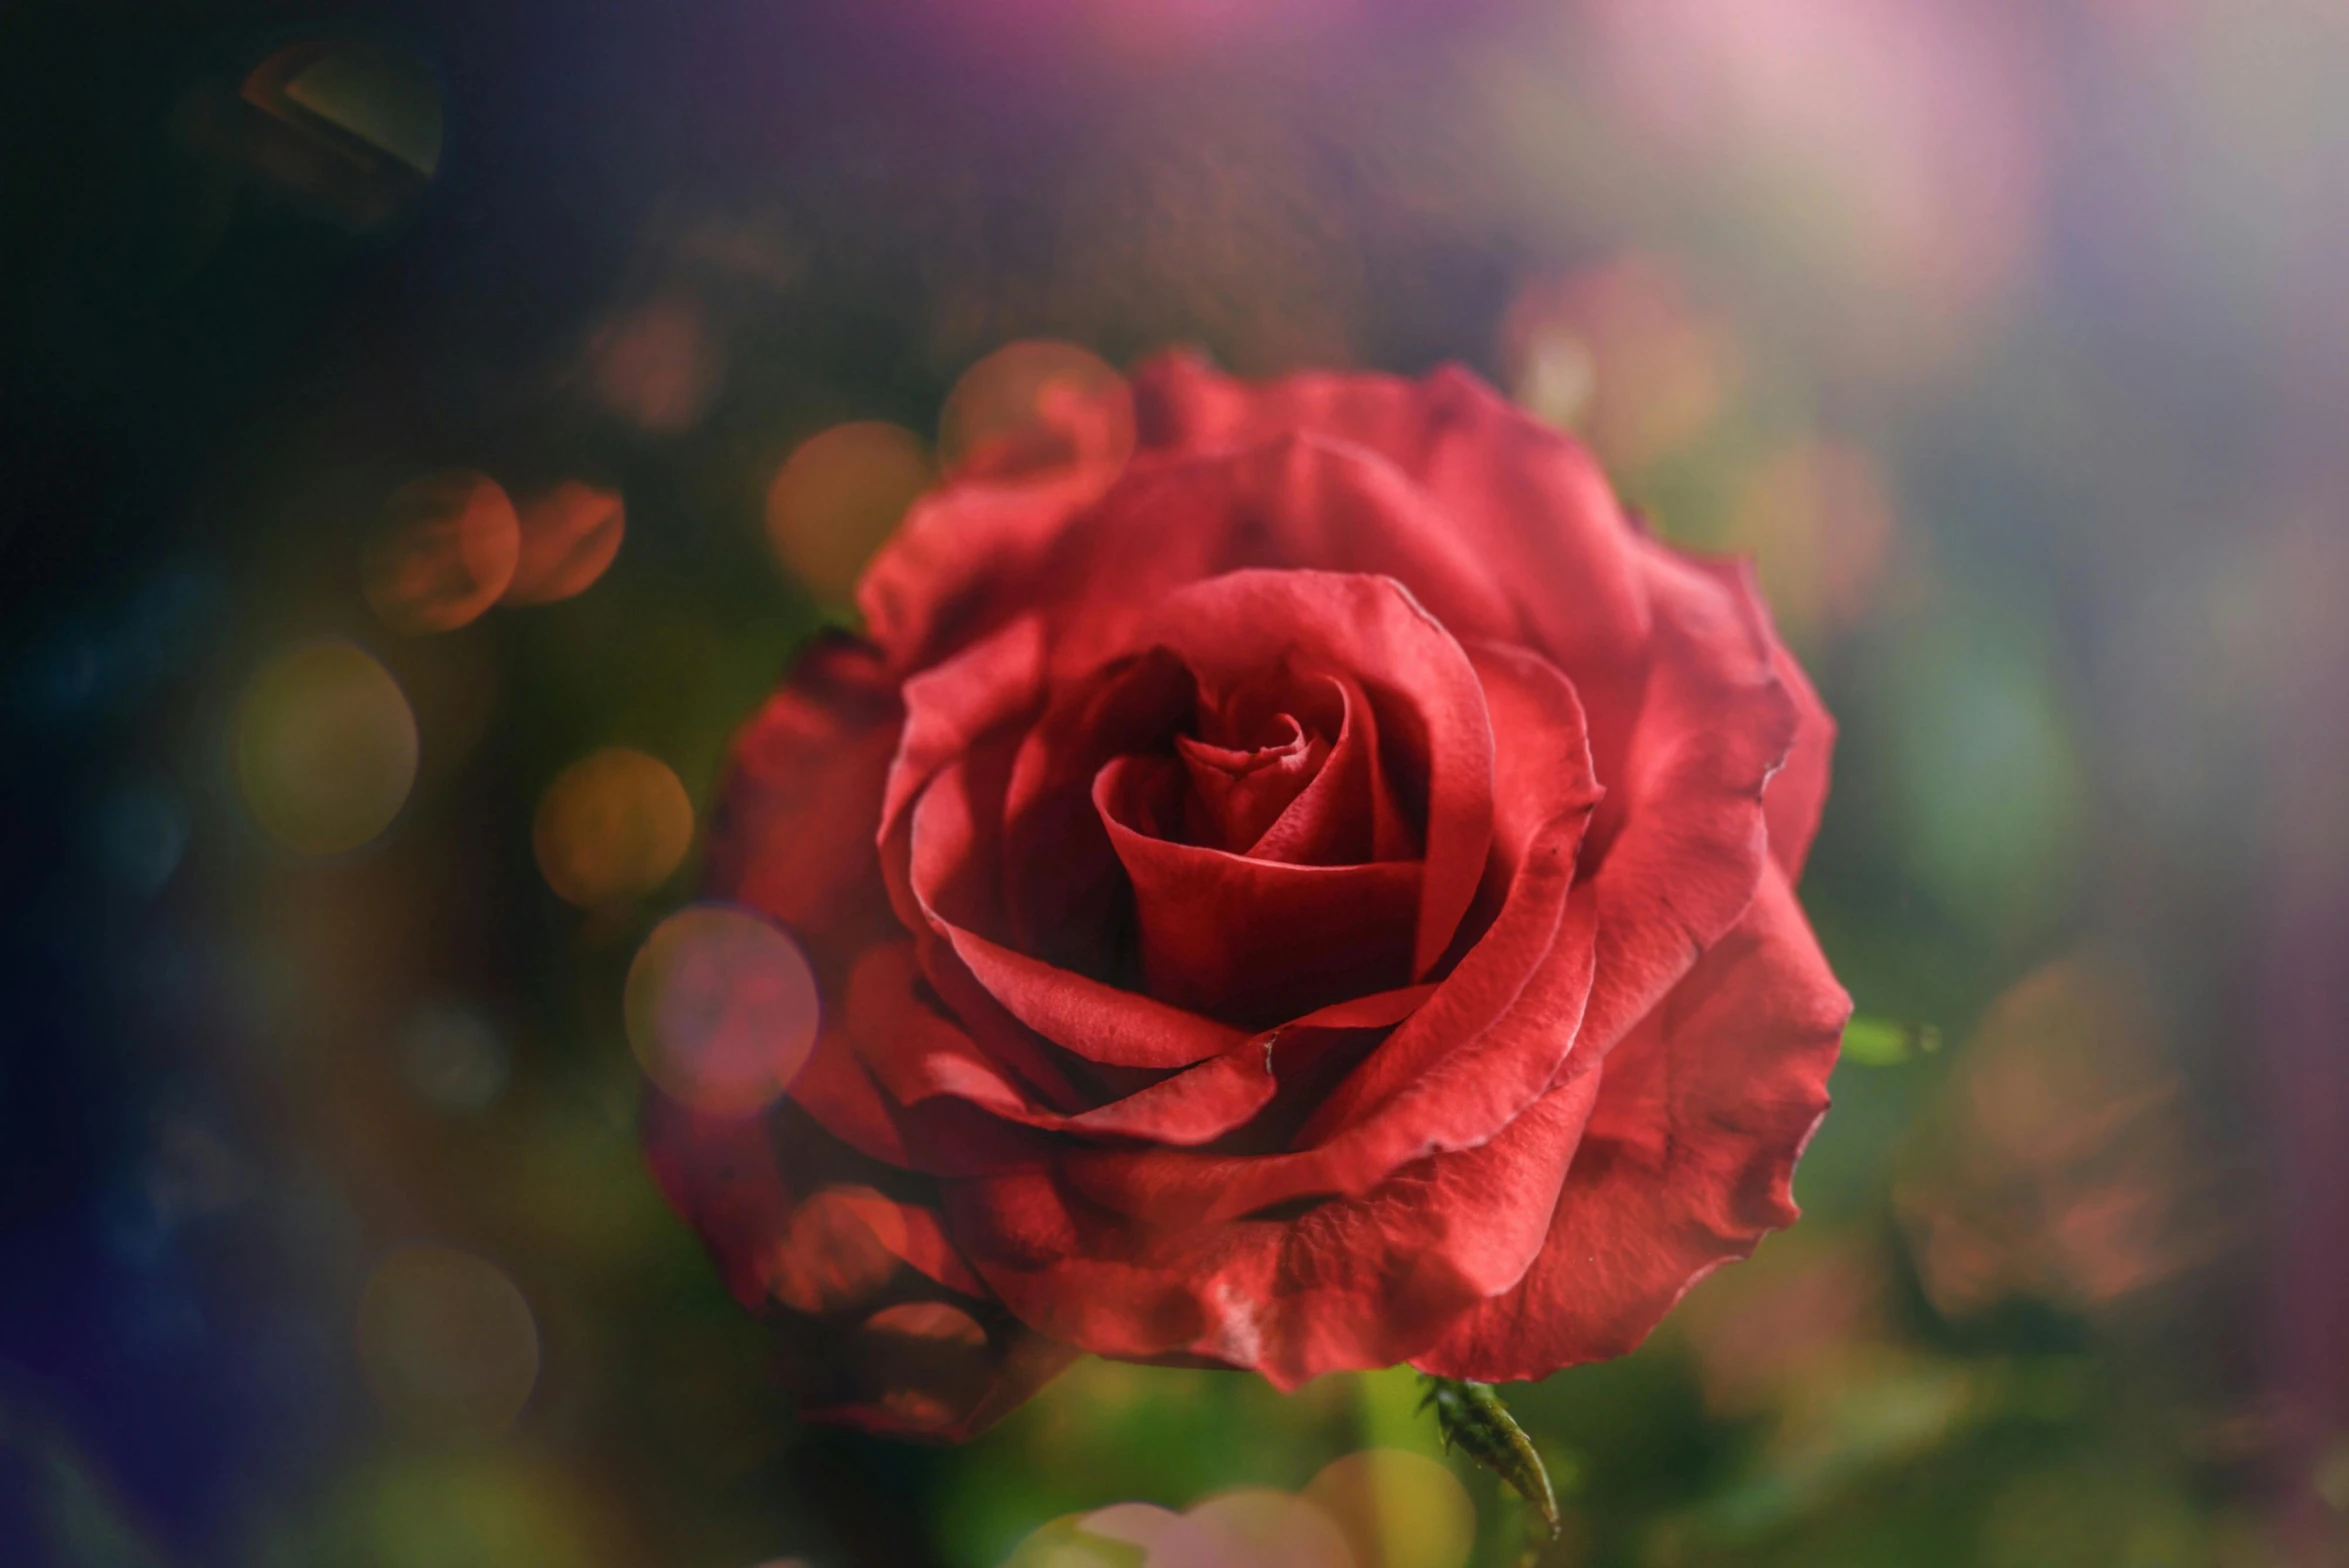 a red rose sitting on top of a lush green field, paul barson, rose pink lighting, bokeh photograph, crimson